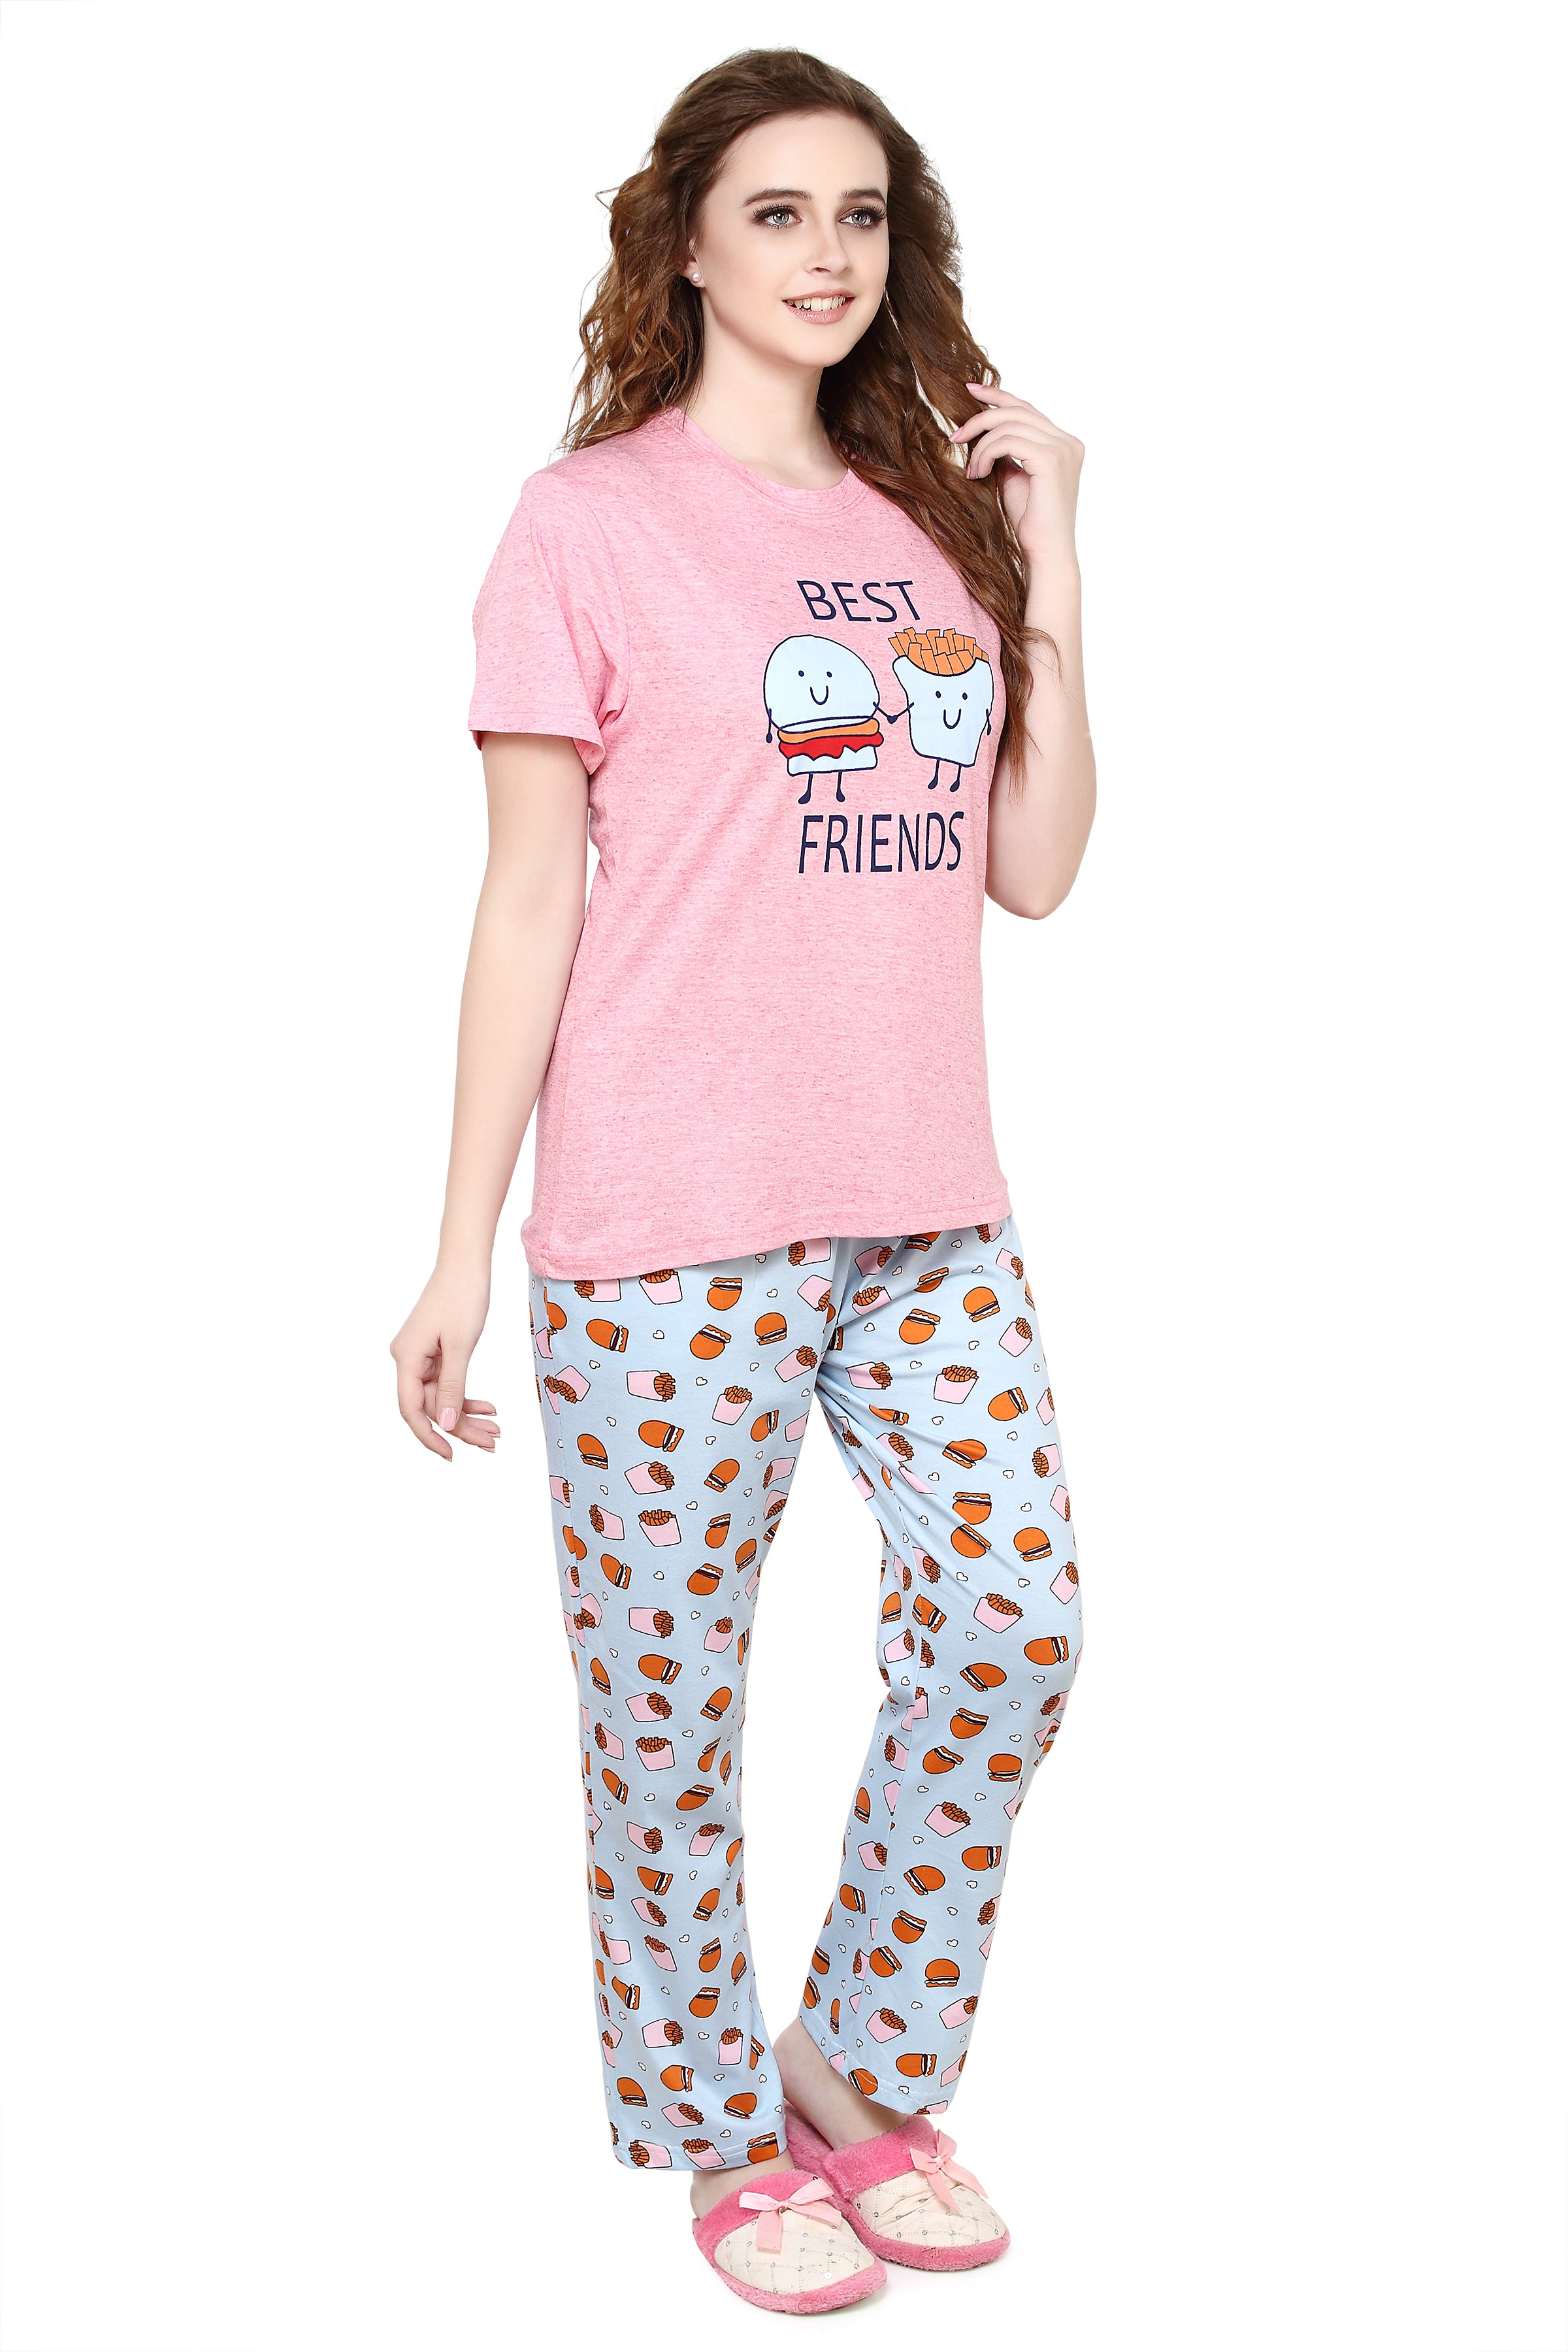 evolove Passion Pink Round neck Burger & Fries Printed Women's (Pajama set), (Pink & Blue), S Get free eyemask inside of any design